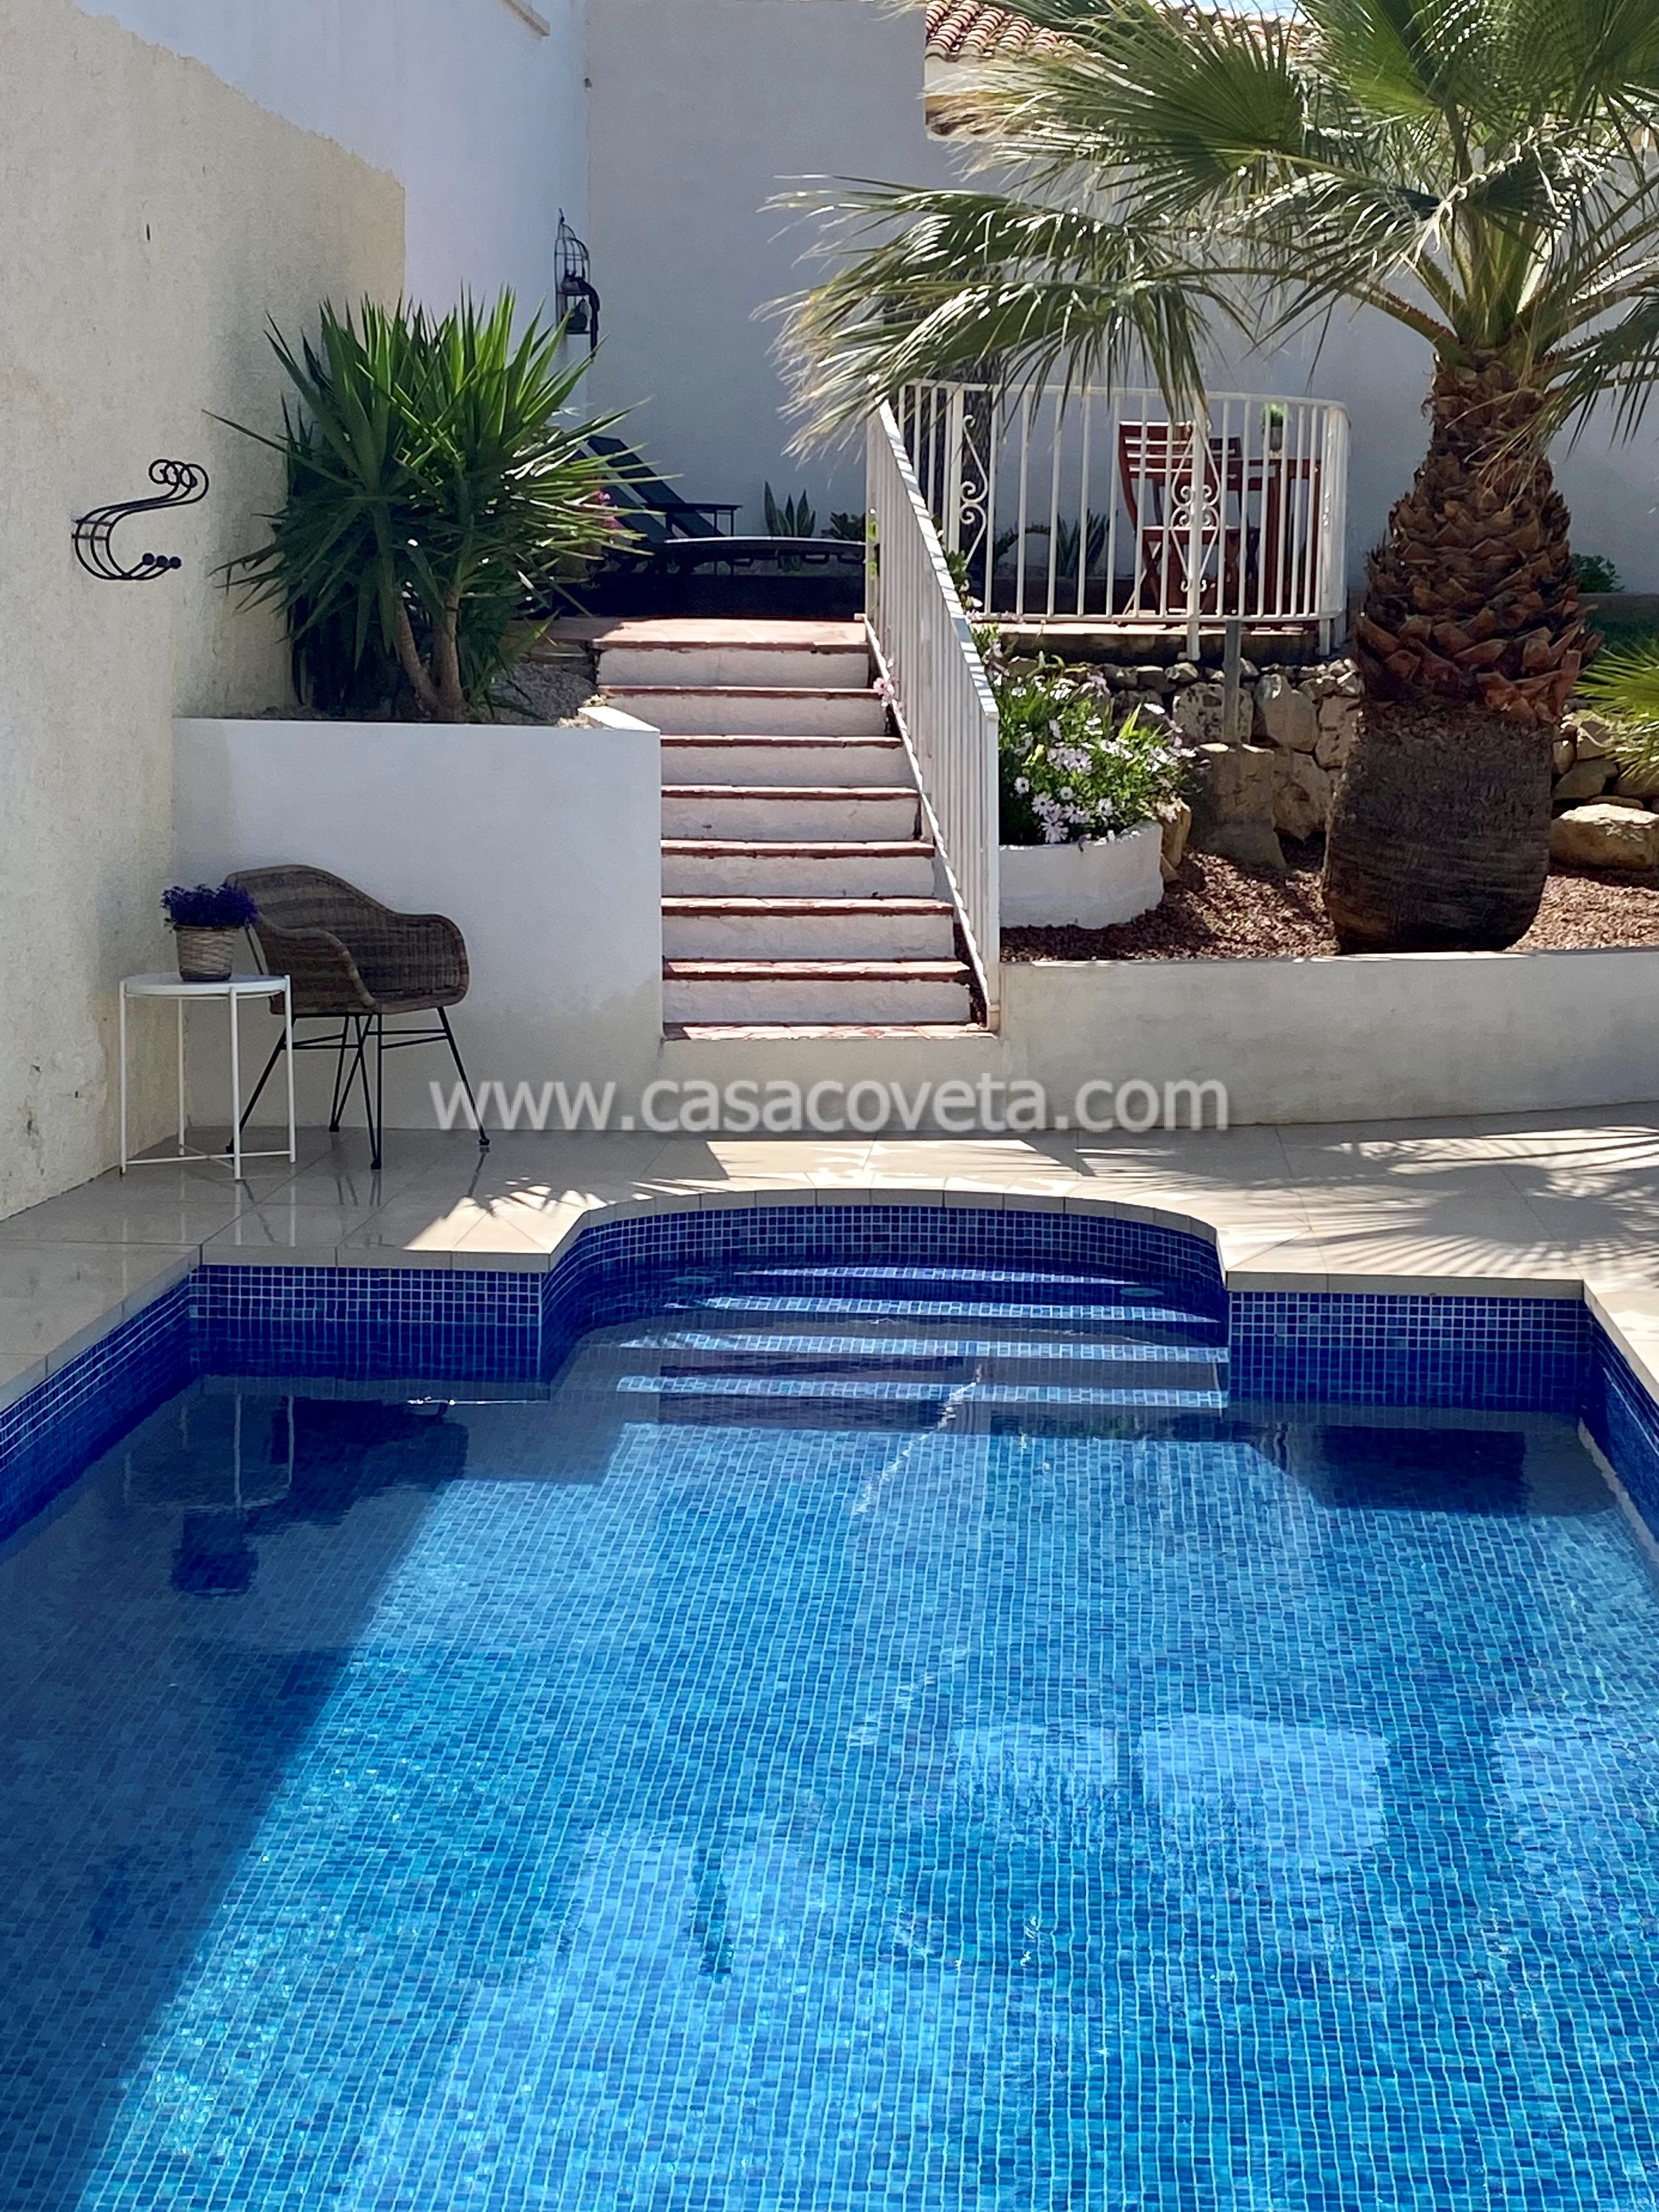 Luxury Villa for 8 persons, private pool, A/A, Wifi, BBQ and sea view.  Ref. 582